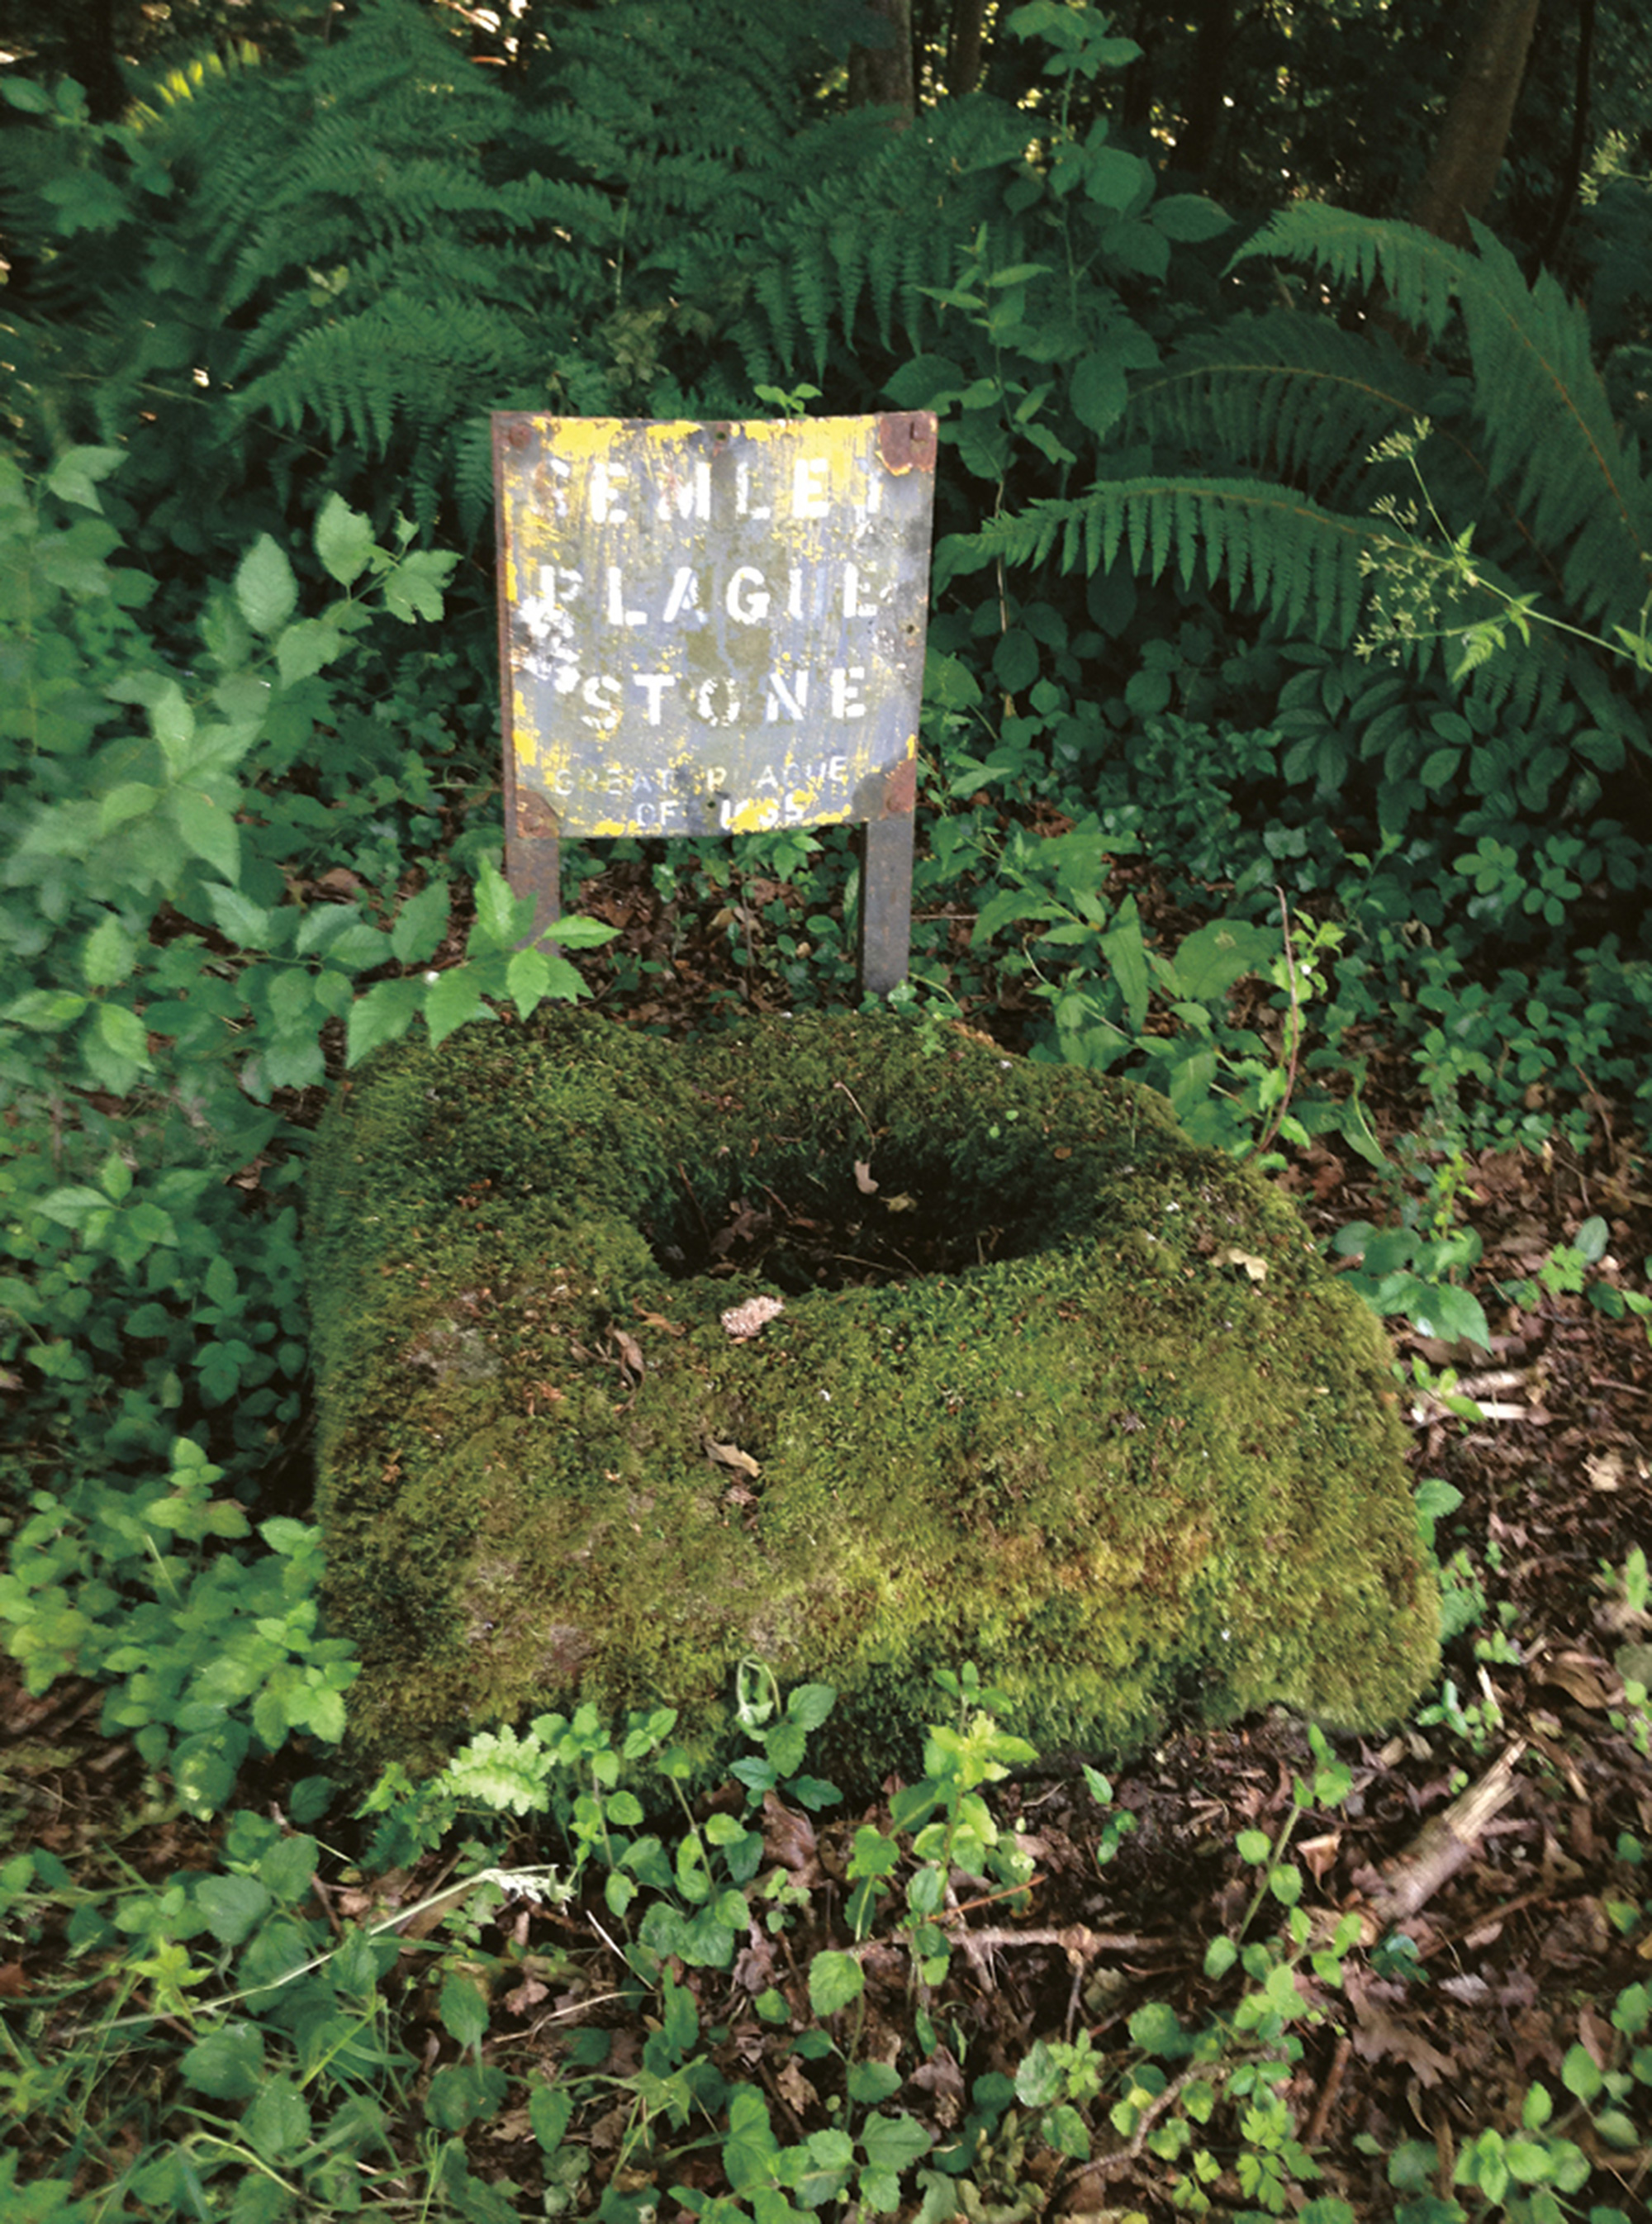 Artist Sophie Nys’s photograph of a plague stone at Semley, Wiltshire.